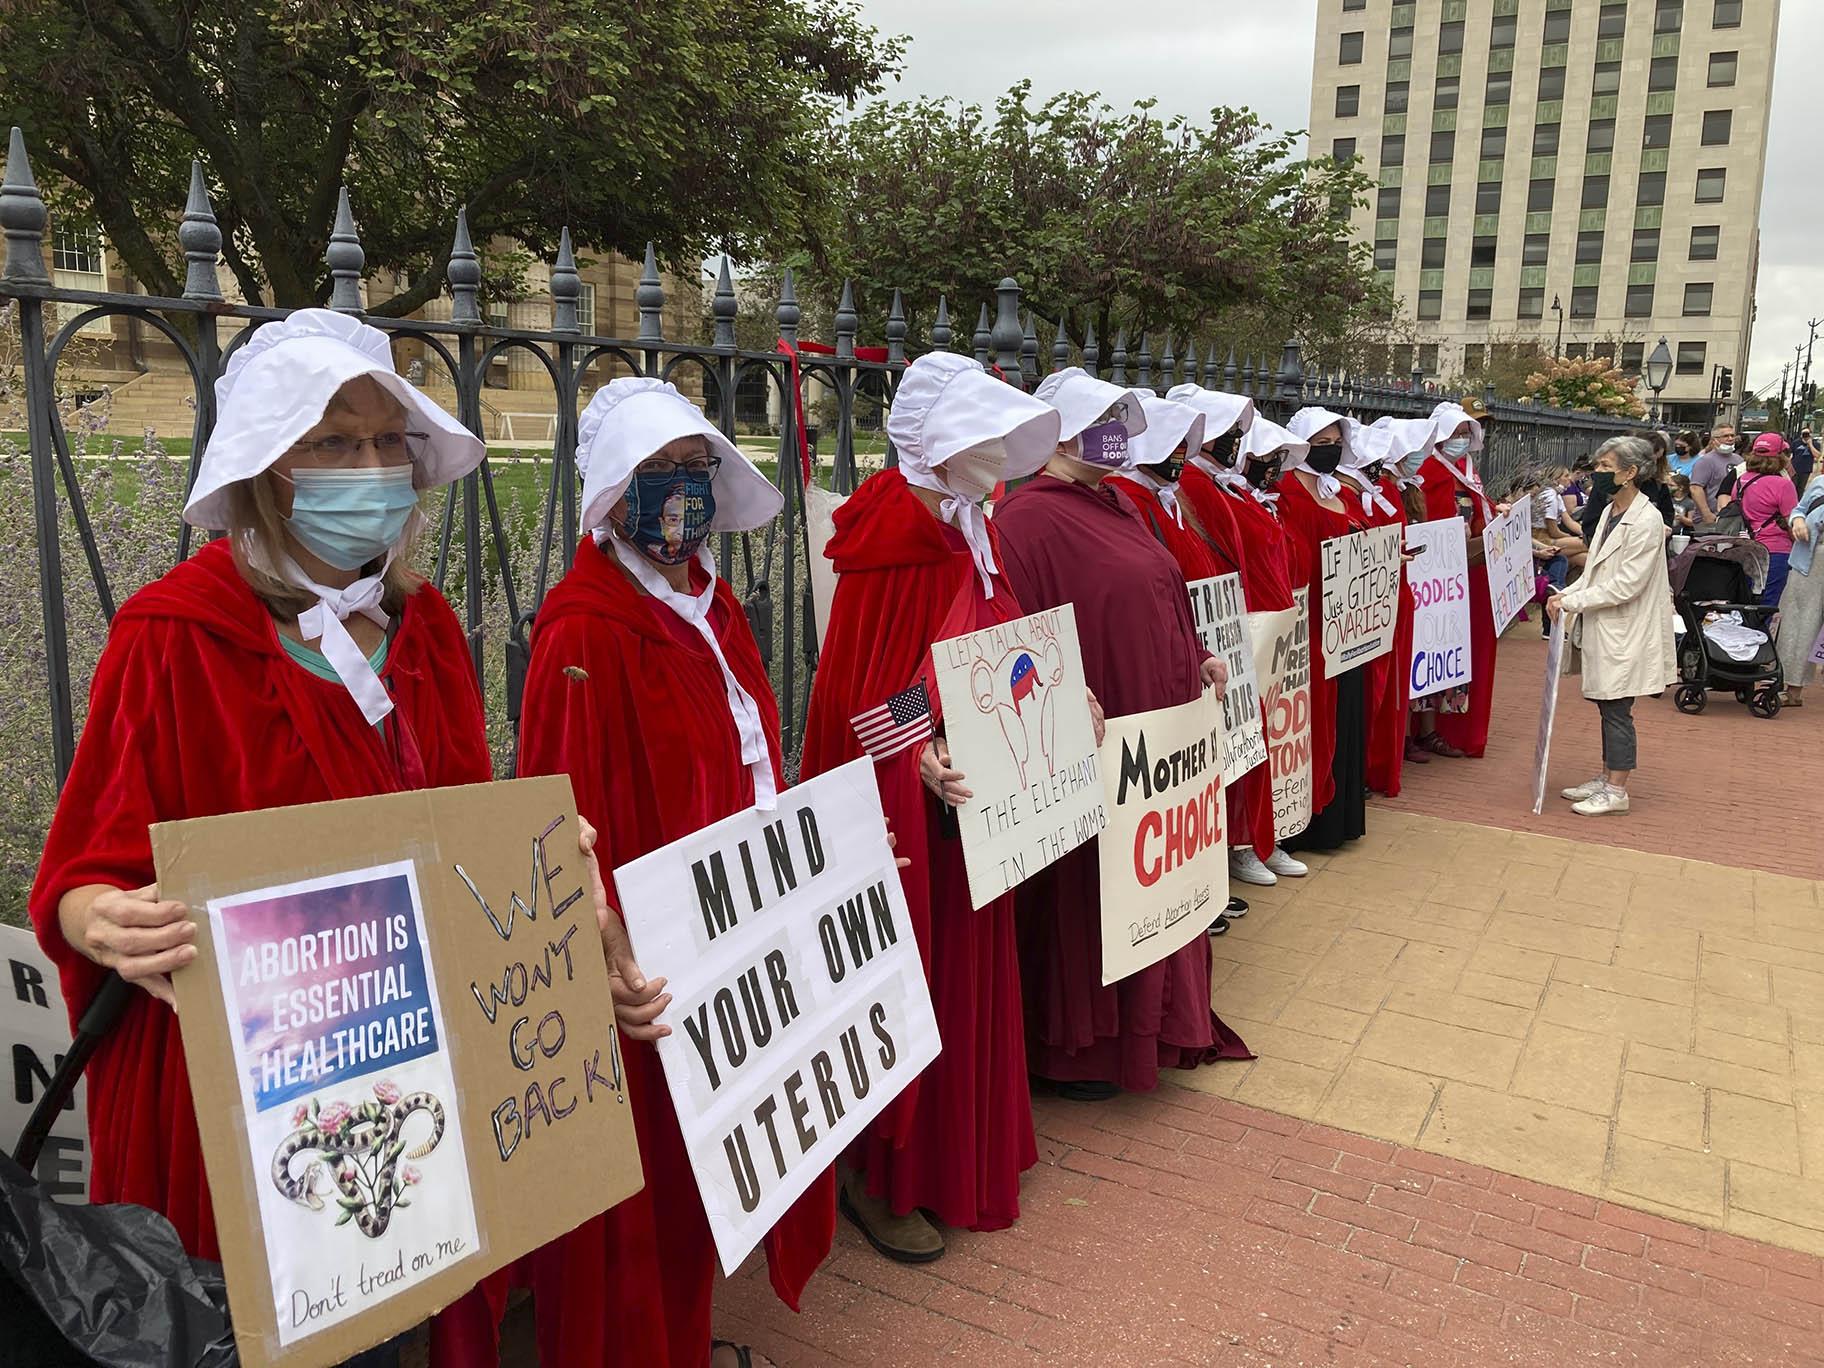 The Illinois Handmaids protest abortion restrictions at a rally in downtown Springfield, Ill., on Saturday, Oct. 2, 2021. (AP Photo / John O’Connor)